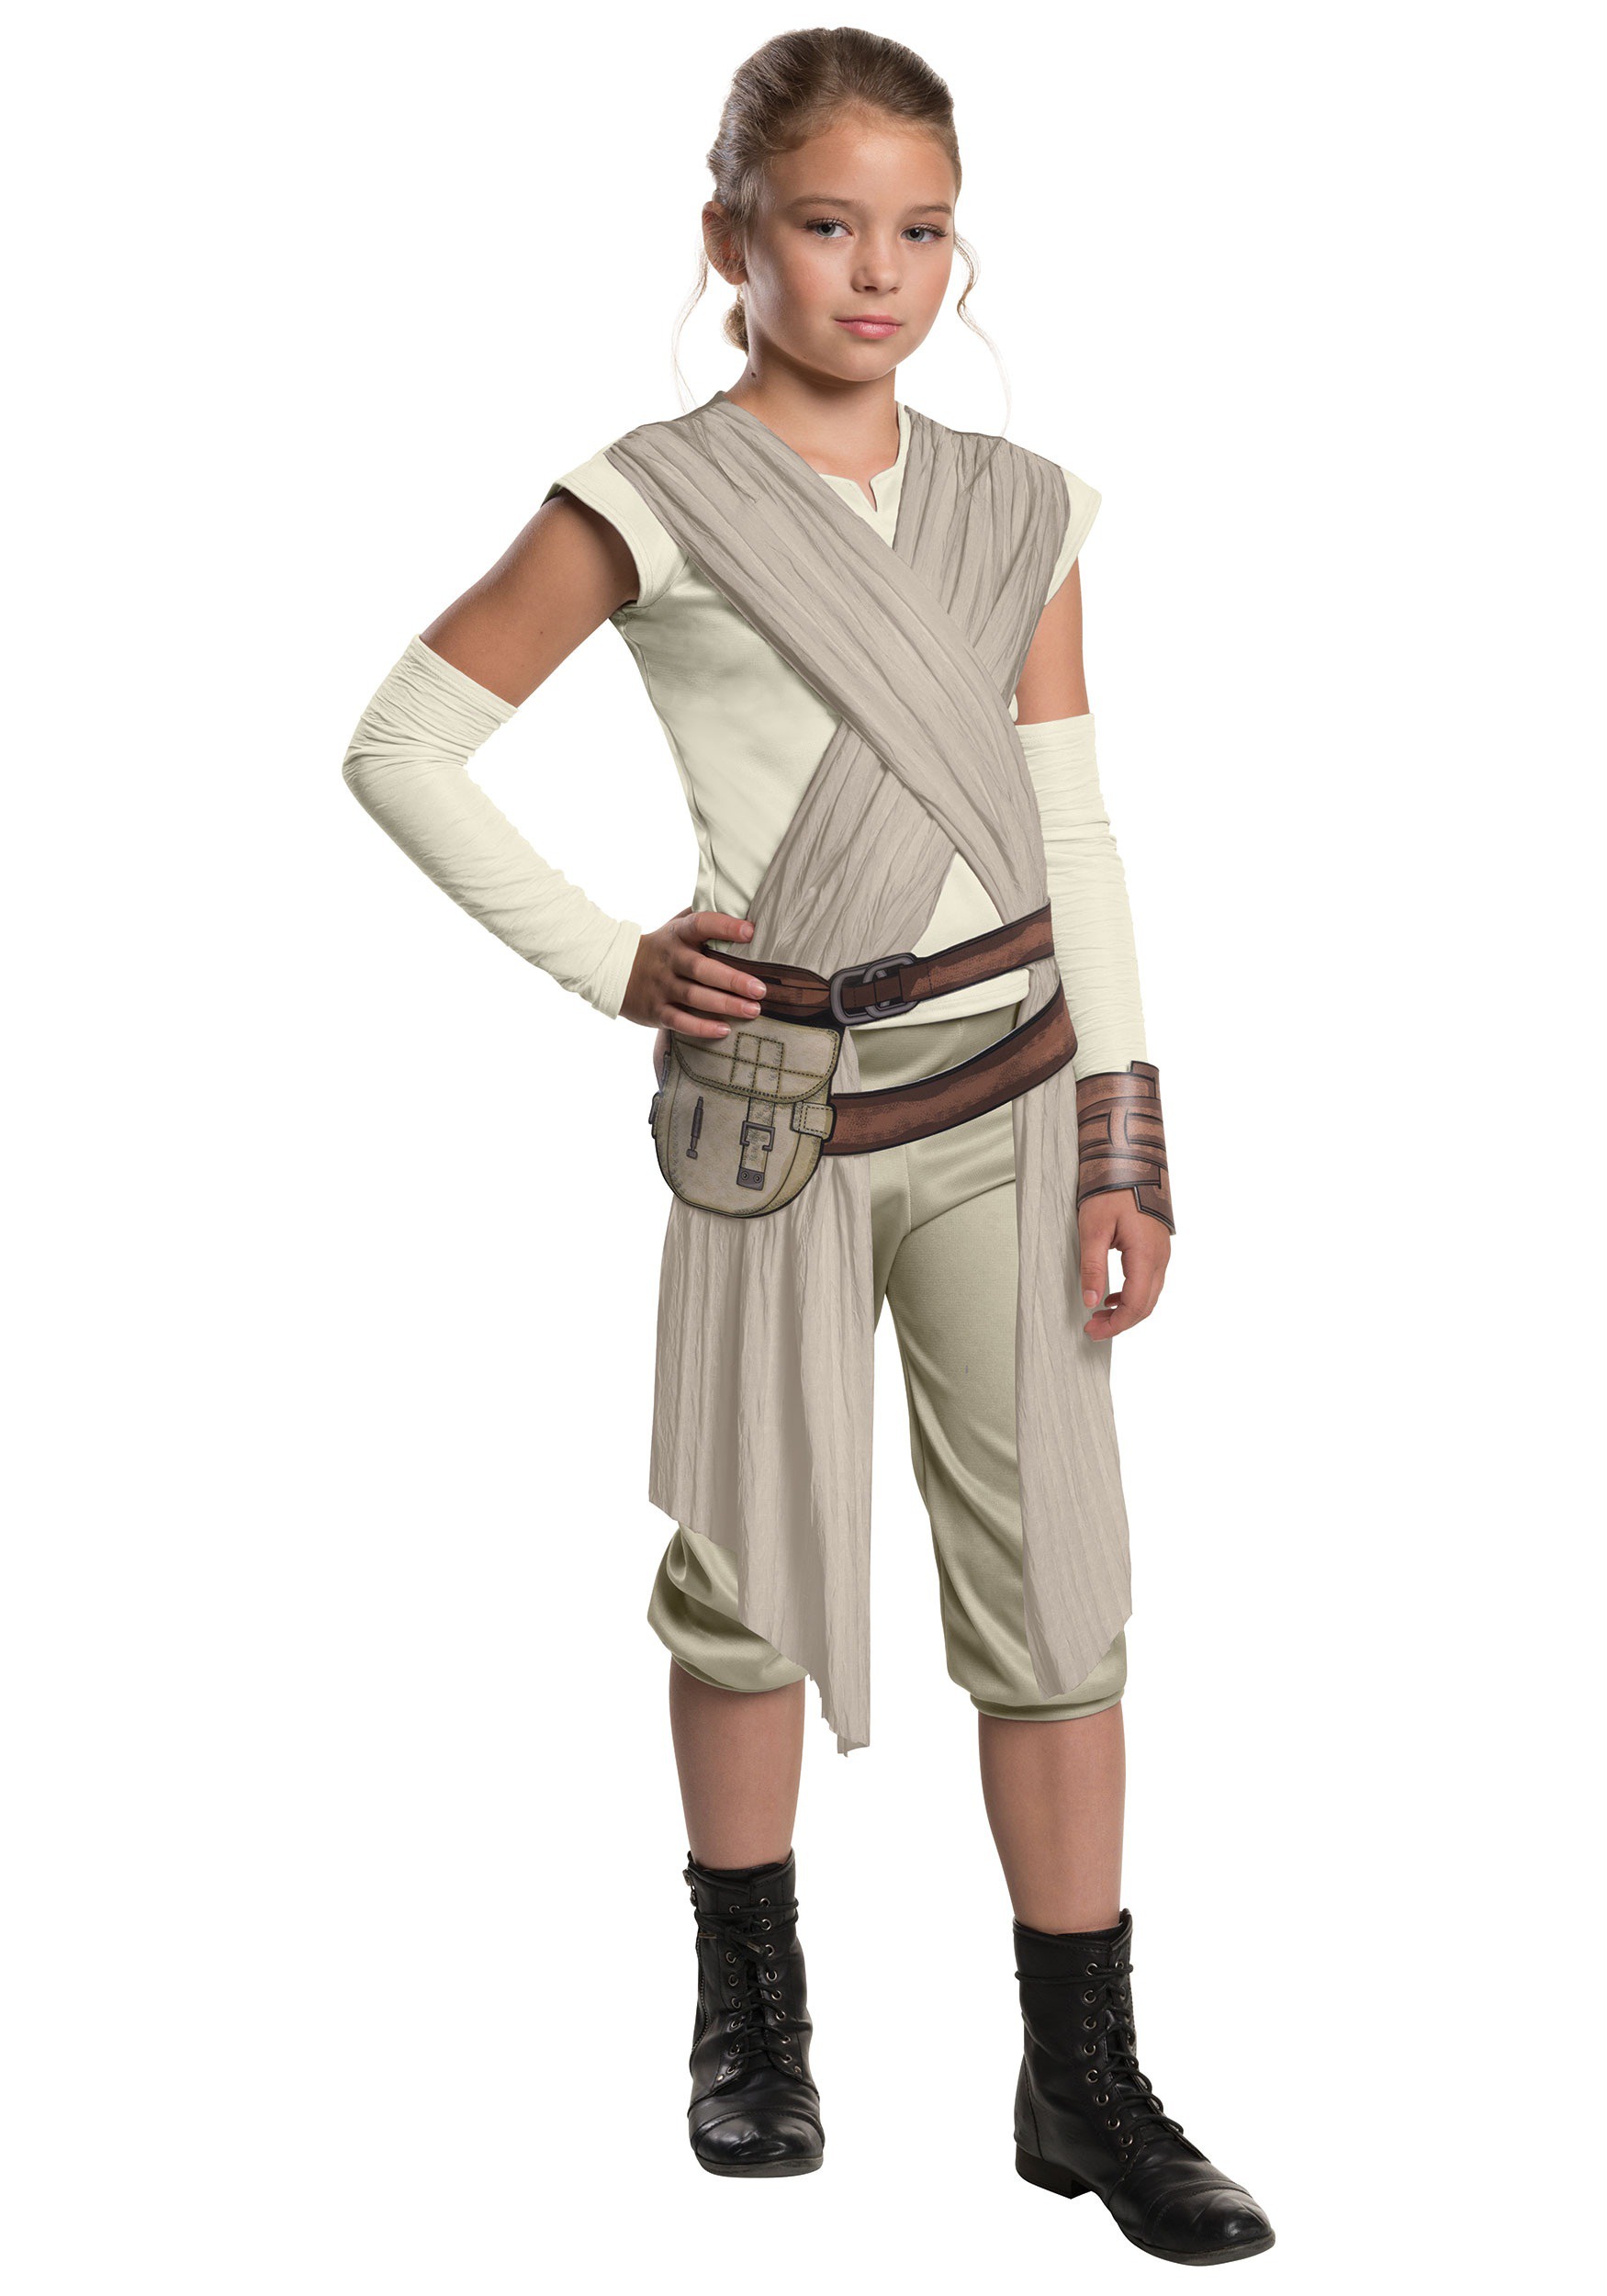 Child Deluxe Star Wars The Force Awakens Rey Costume